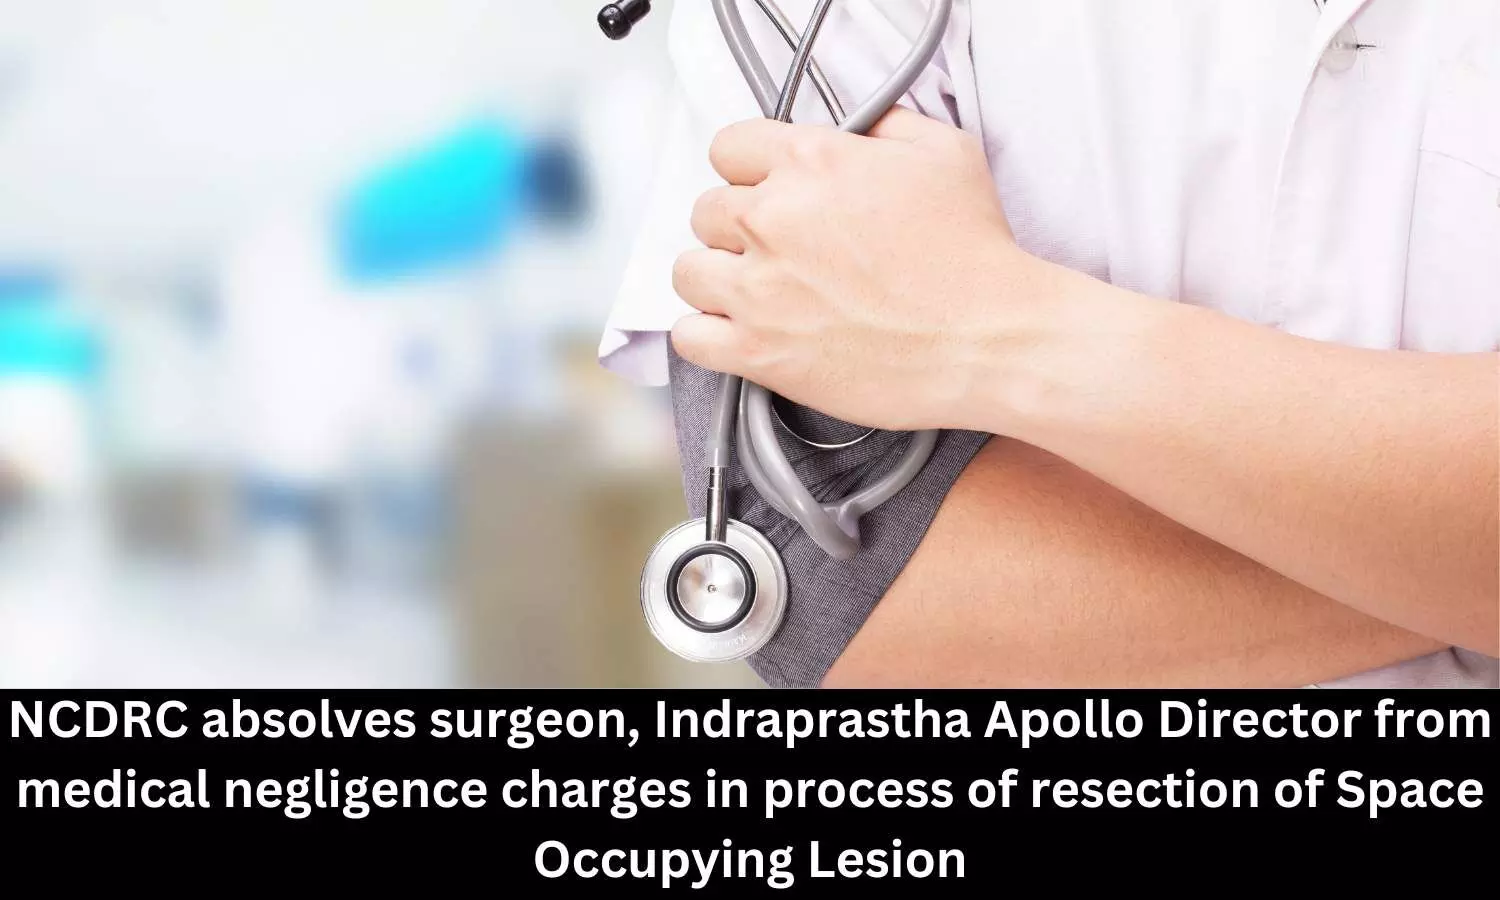 NCDRC absolves surgeon, Indraprastha Apollo Director from medical negligence charges in process of resection of Space Occupying Lesion